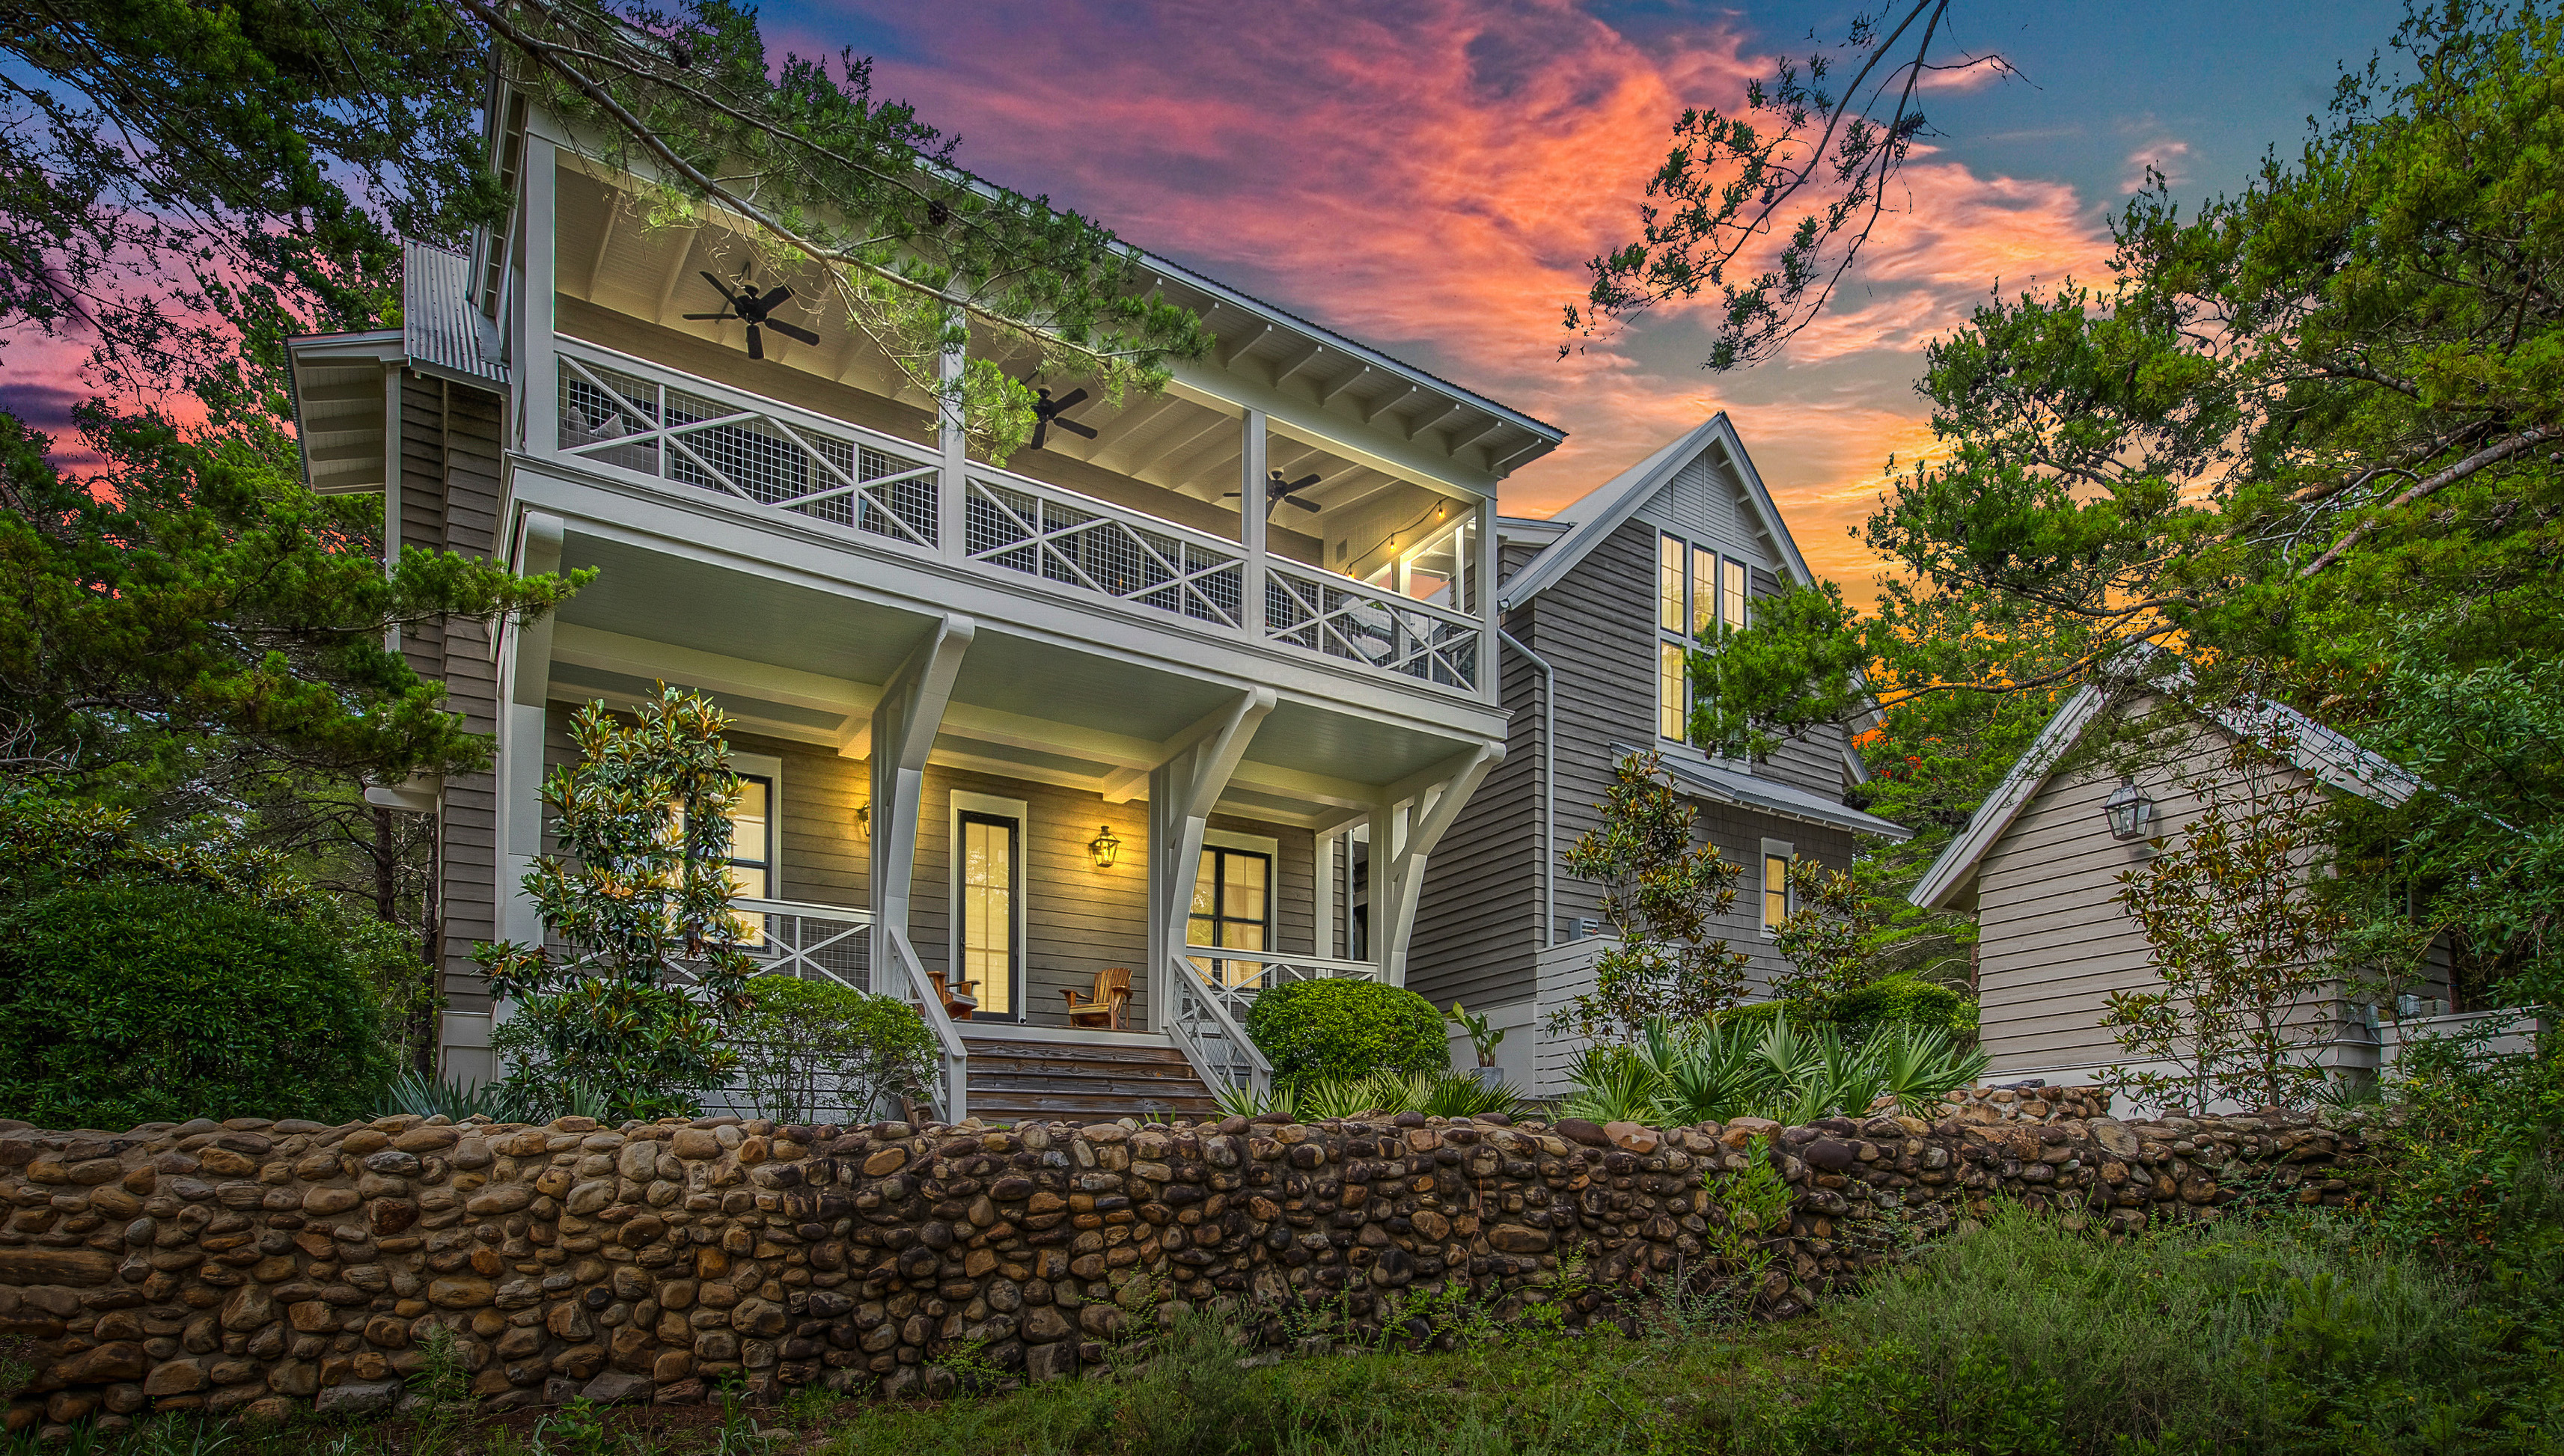 A beautiful Draper Lake home pictured at sunset